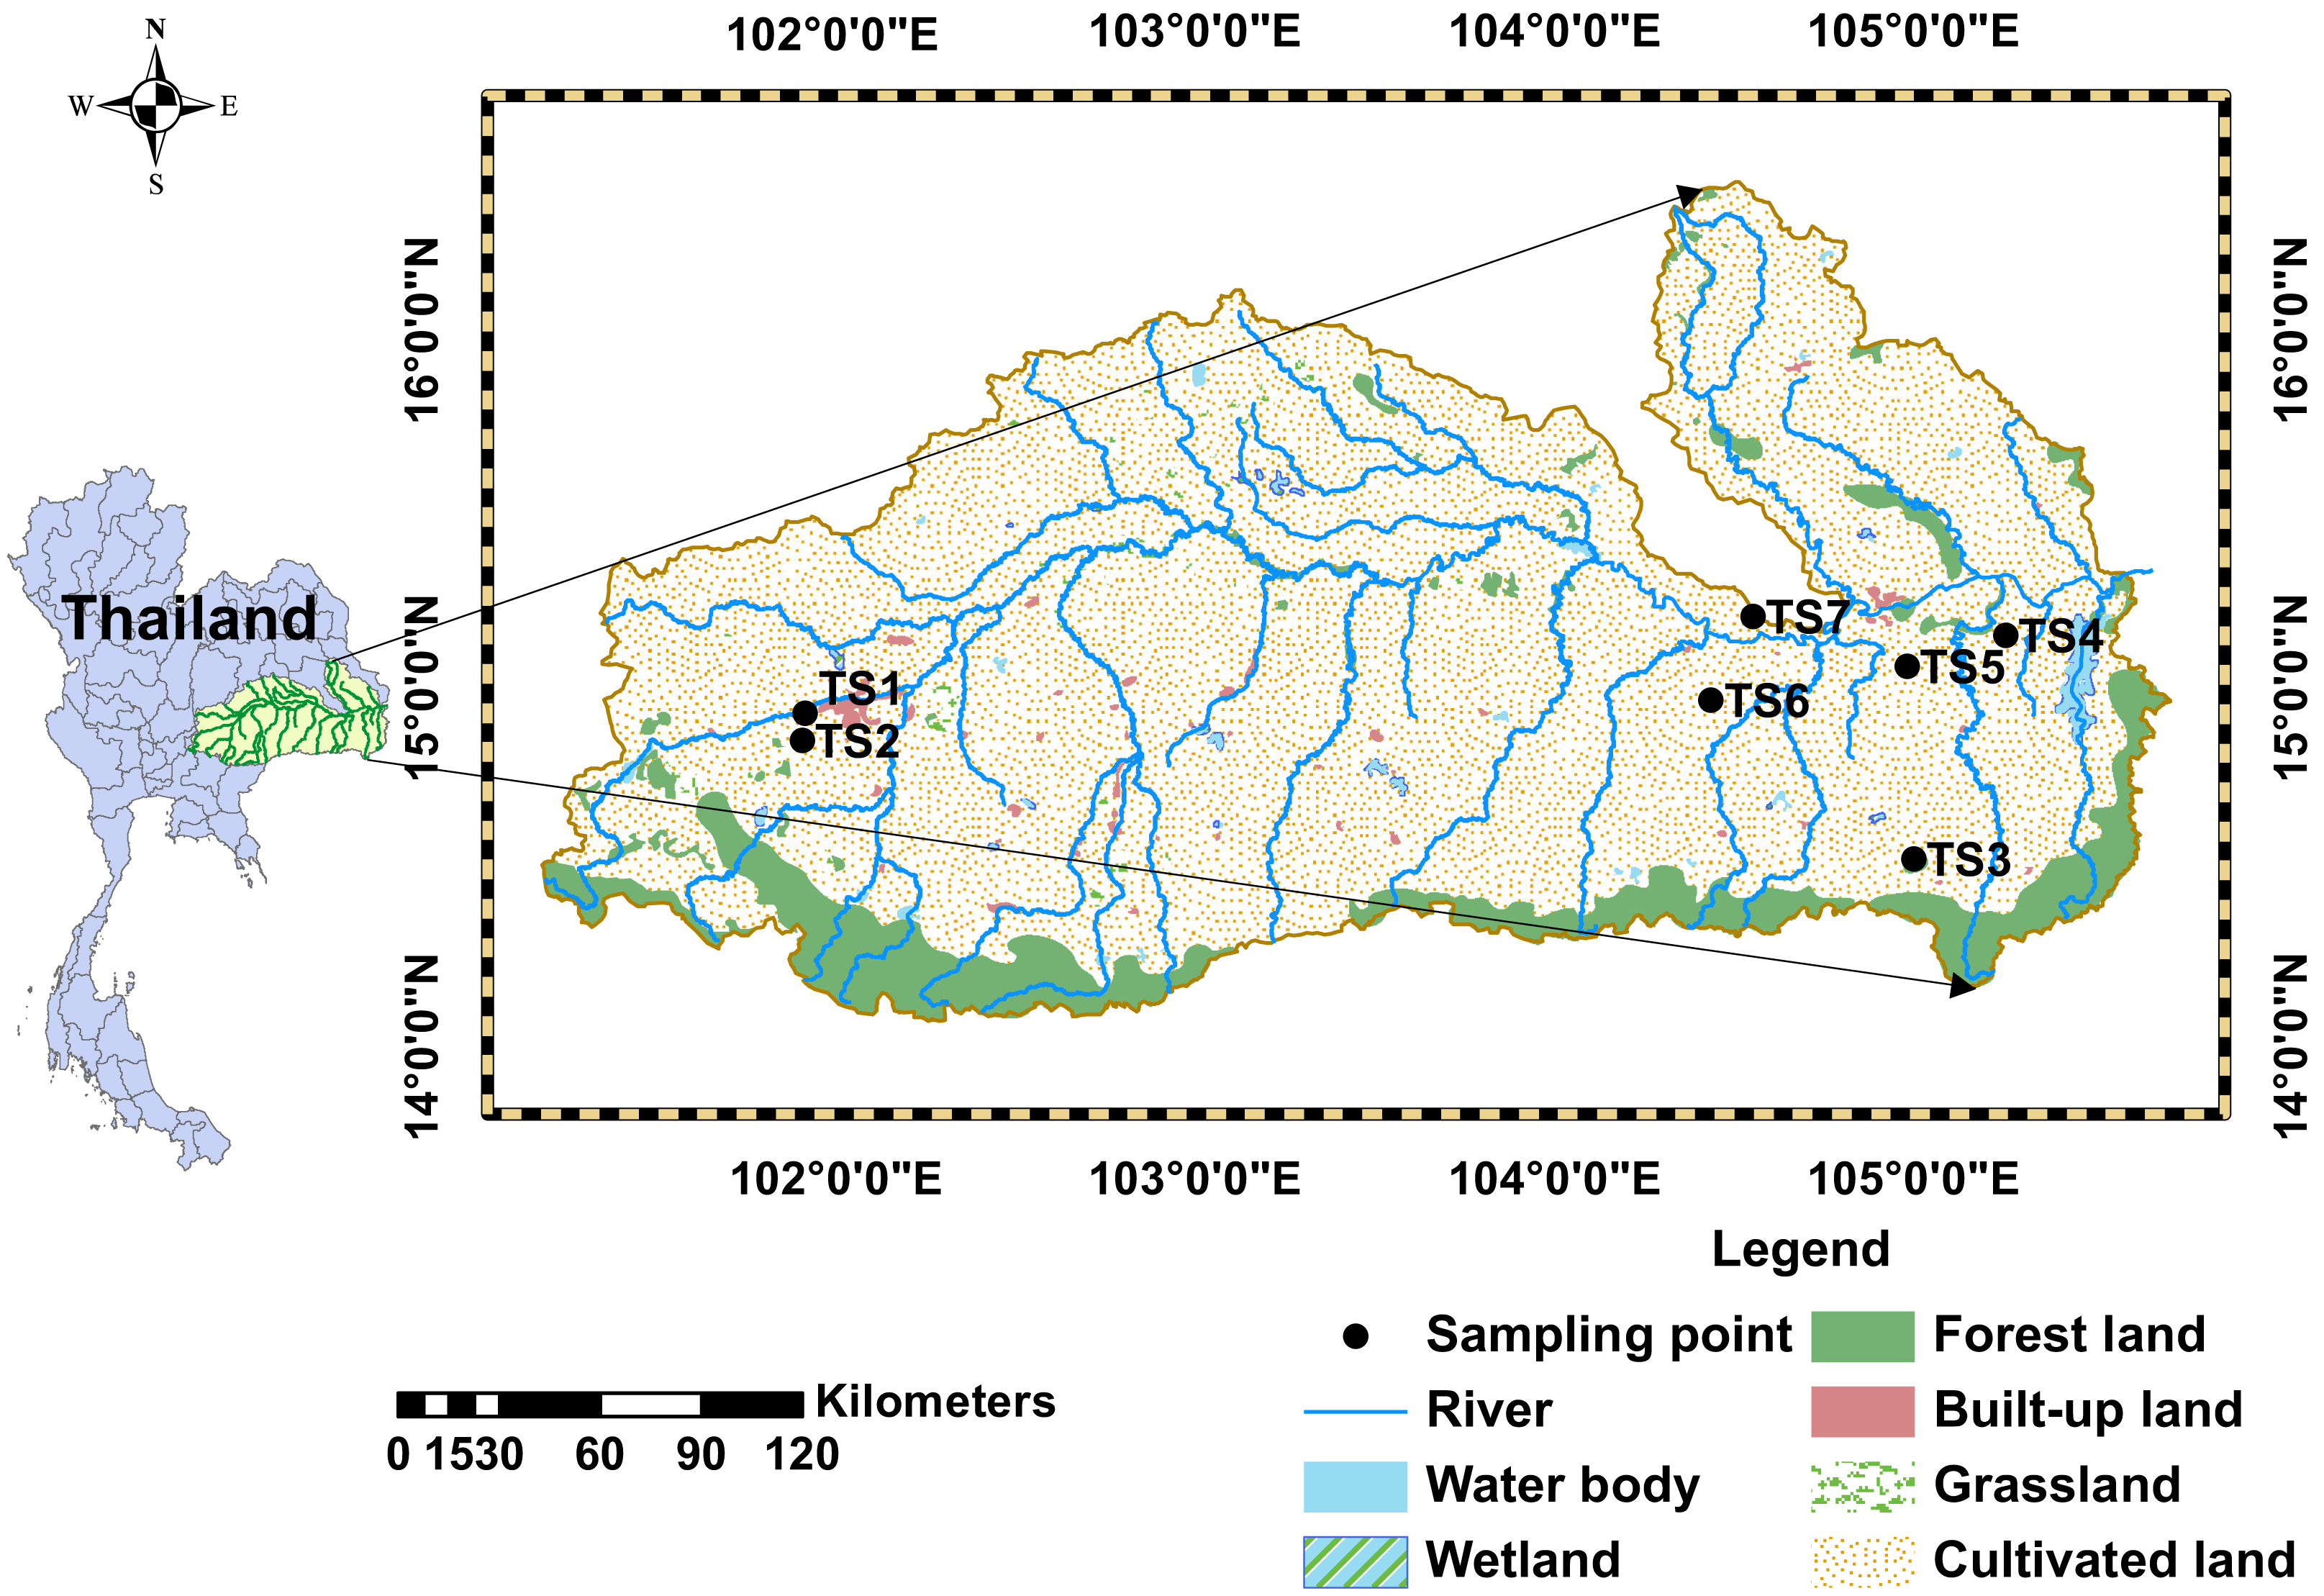 Effects Of Soil Ph And Texture On Soil Carbon And Nitrogen In Soil Profiles Under Different Land Uses In Mun River Basin Northeast Thailand Peerj